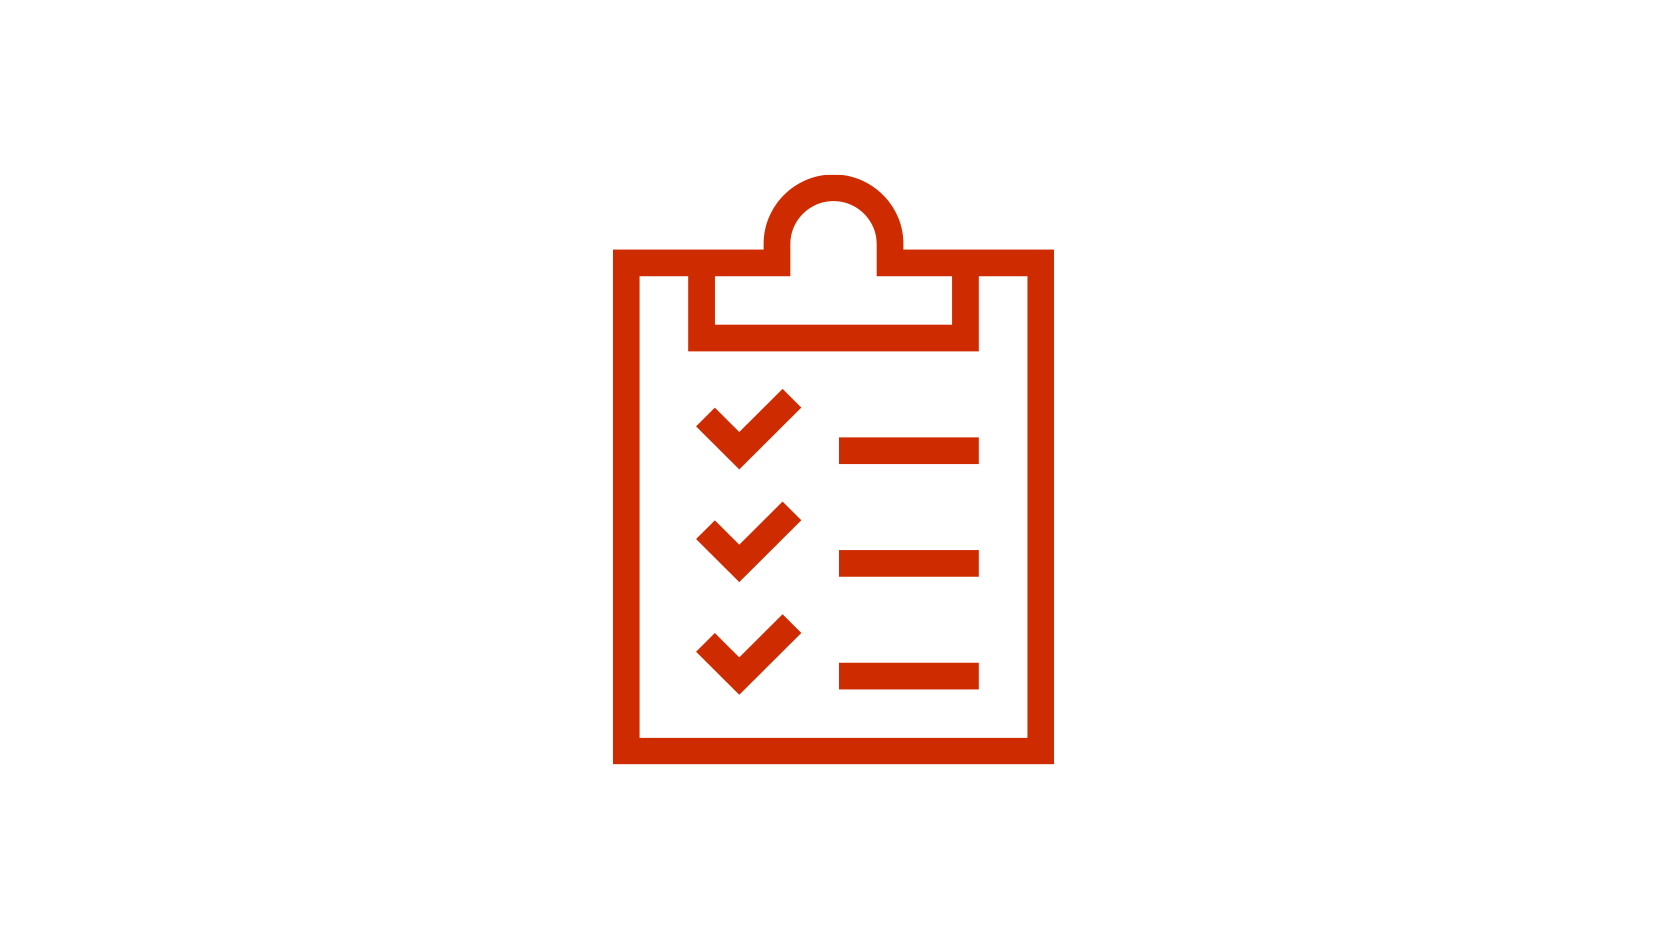 Clipboard icon with checkmarked list